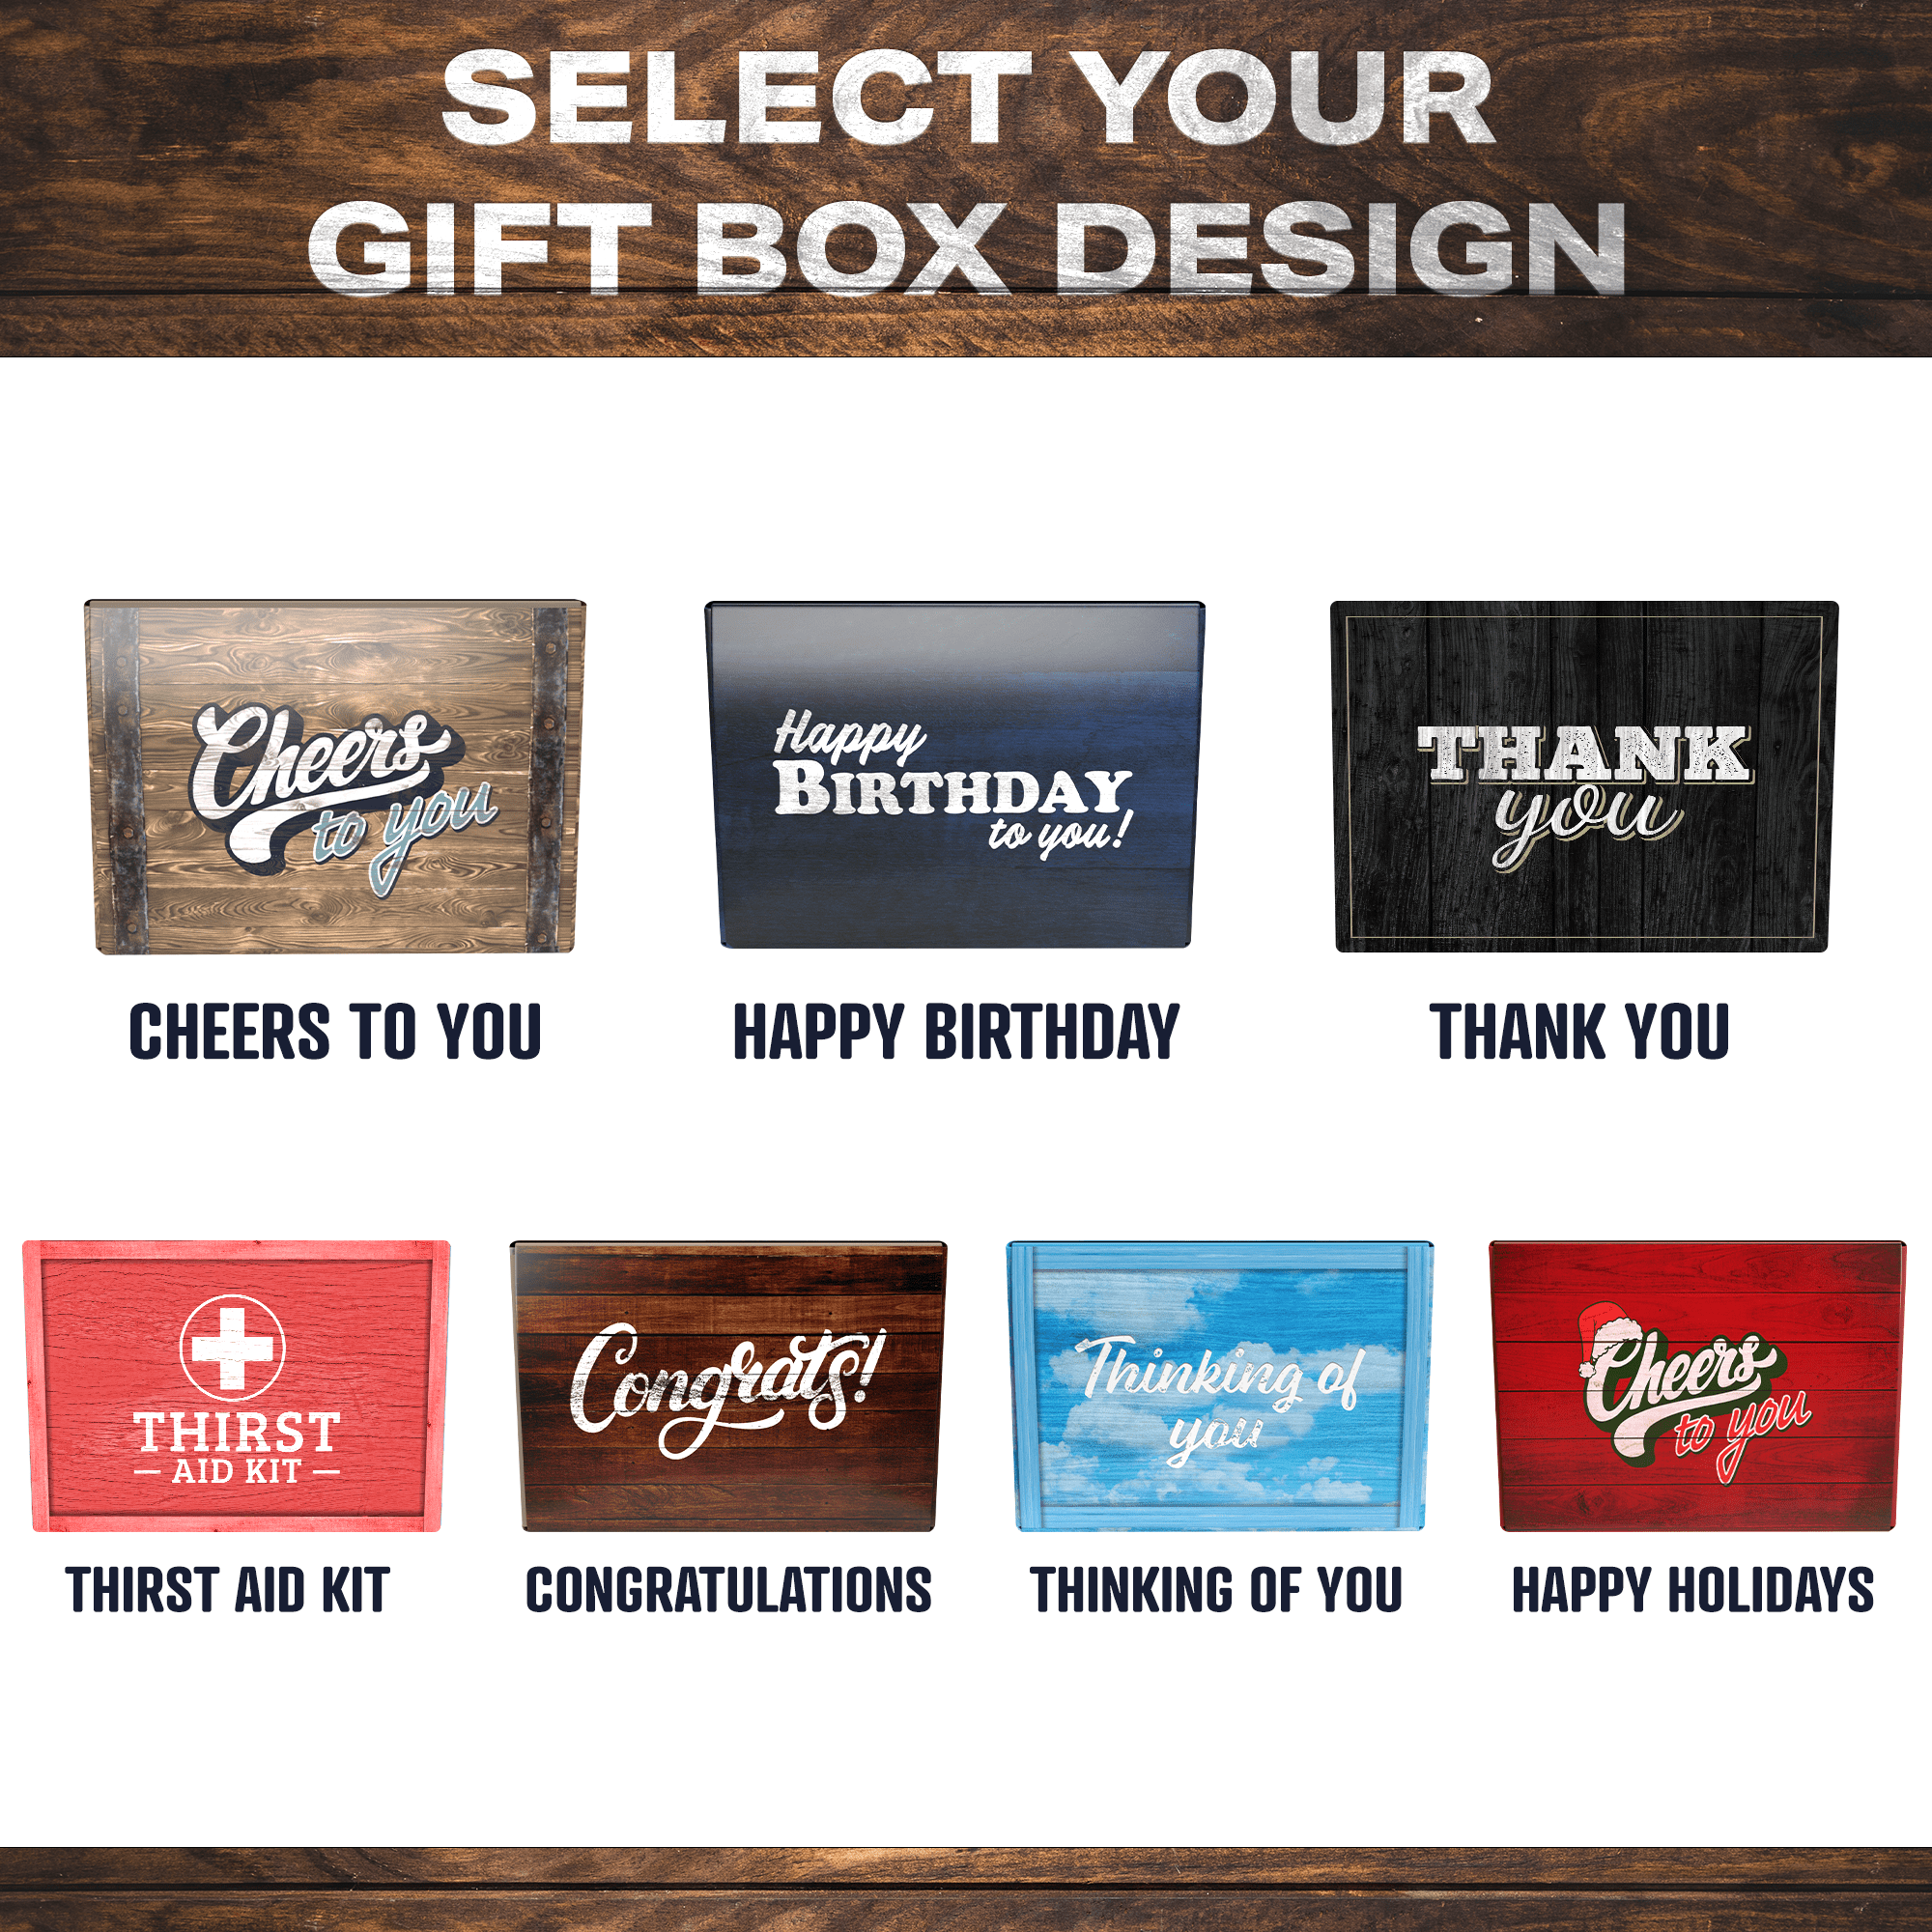 https://www.givethembeer.com/cdn/shop/files/SelectYourGiftBox-V1_e1002133-1a37-4755-aded-75d43e661a04.png?v=1701540865